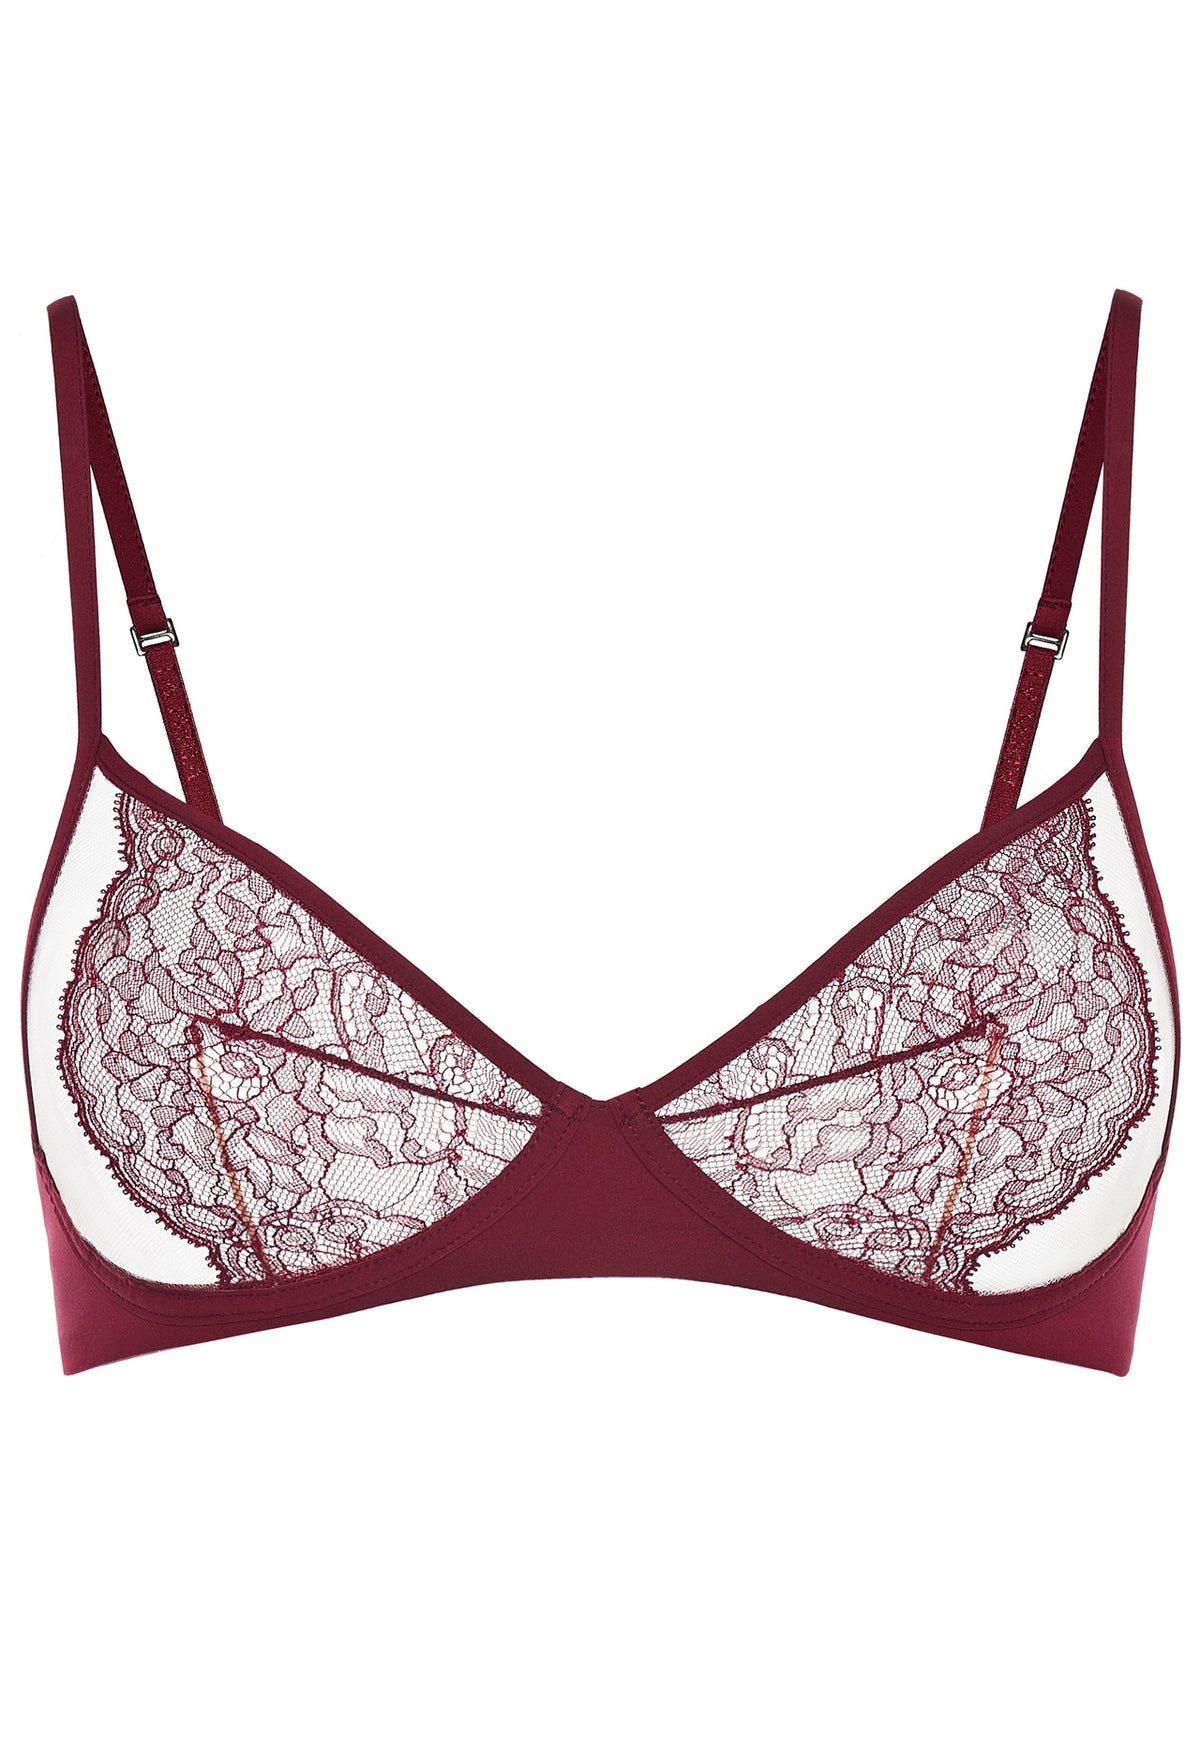 Cranberry Leavers lace non-wired bra